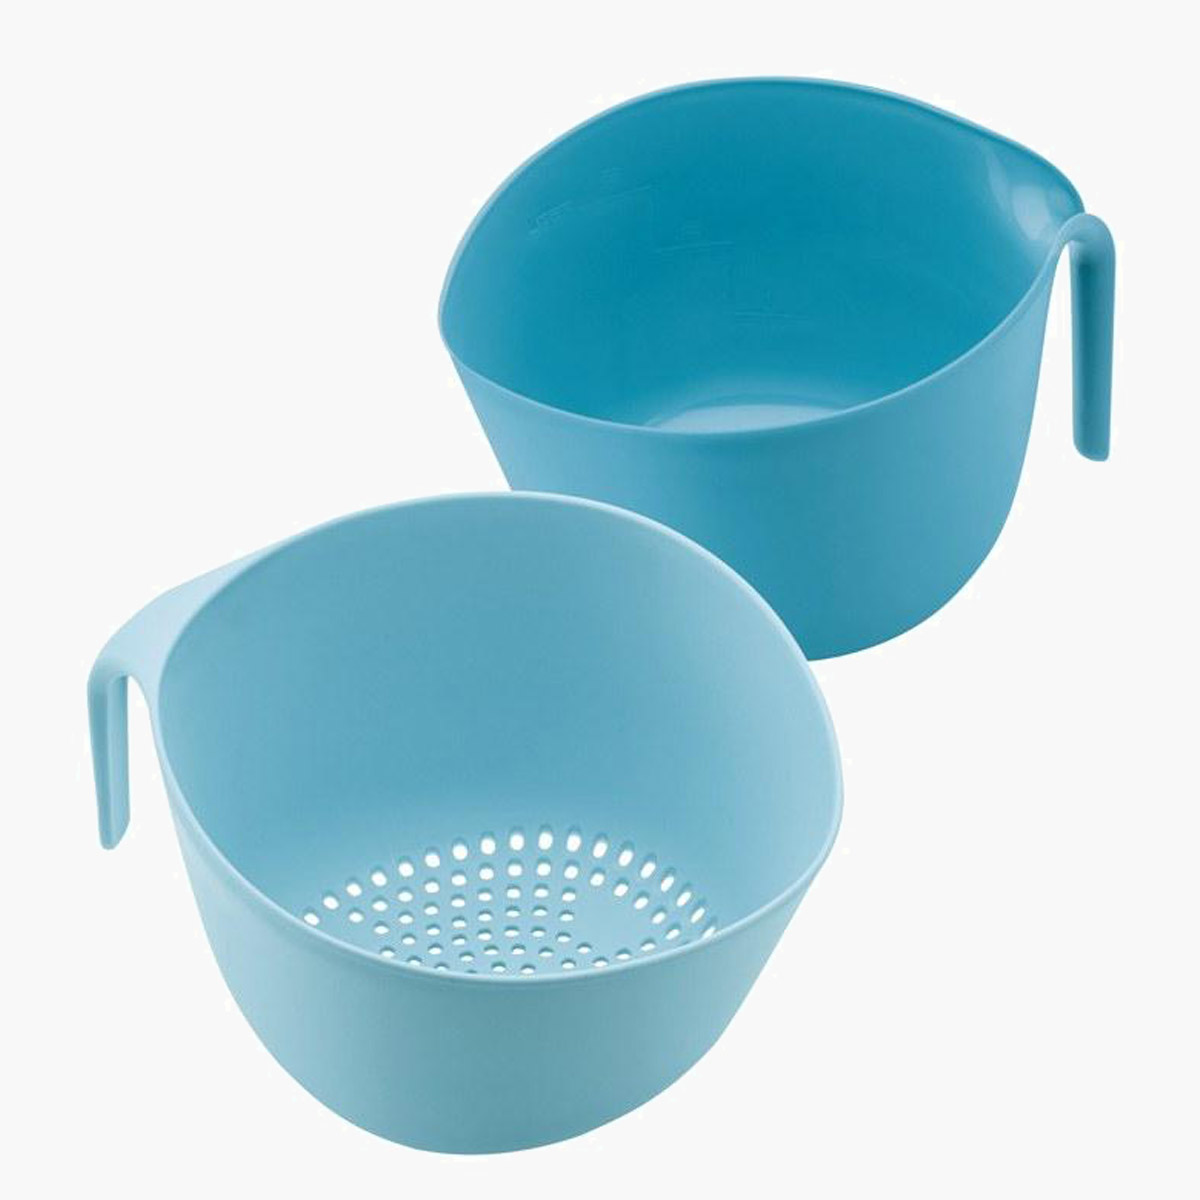 A blue bowl and colander as part of the Ayesha Curry bowl set.